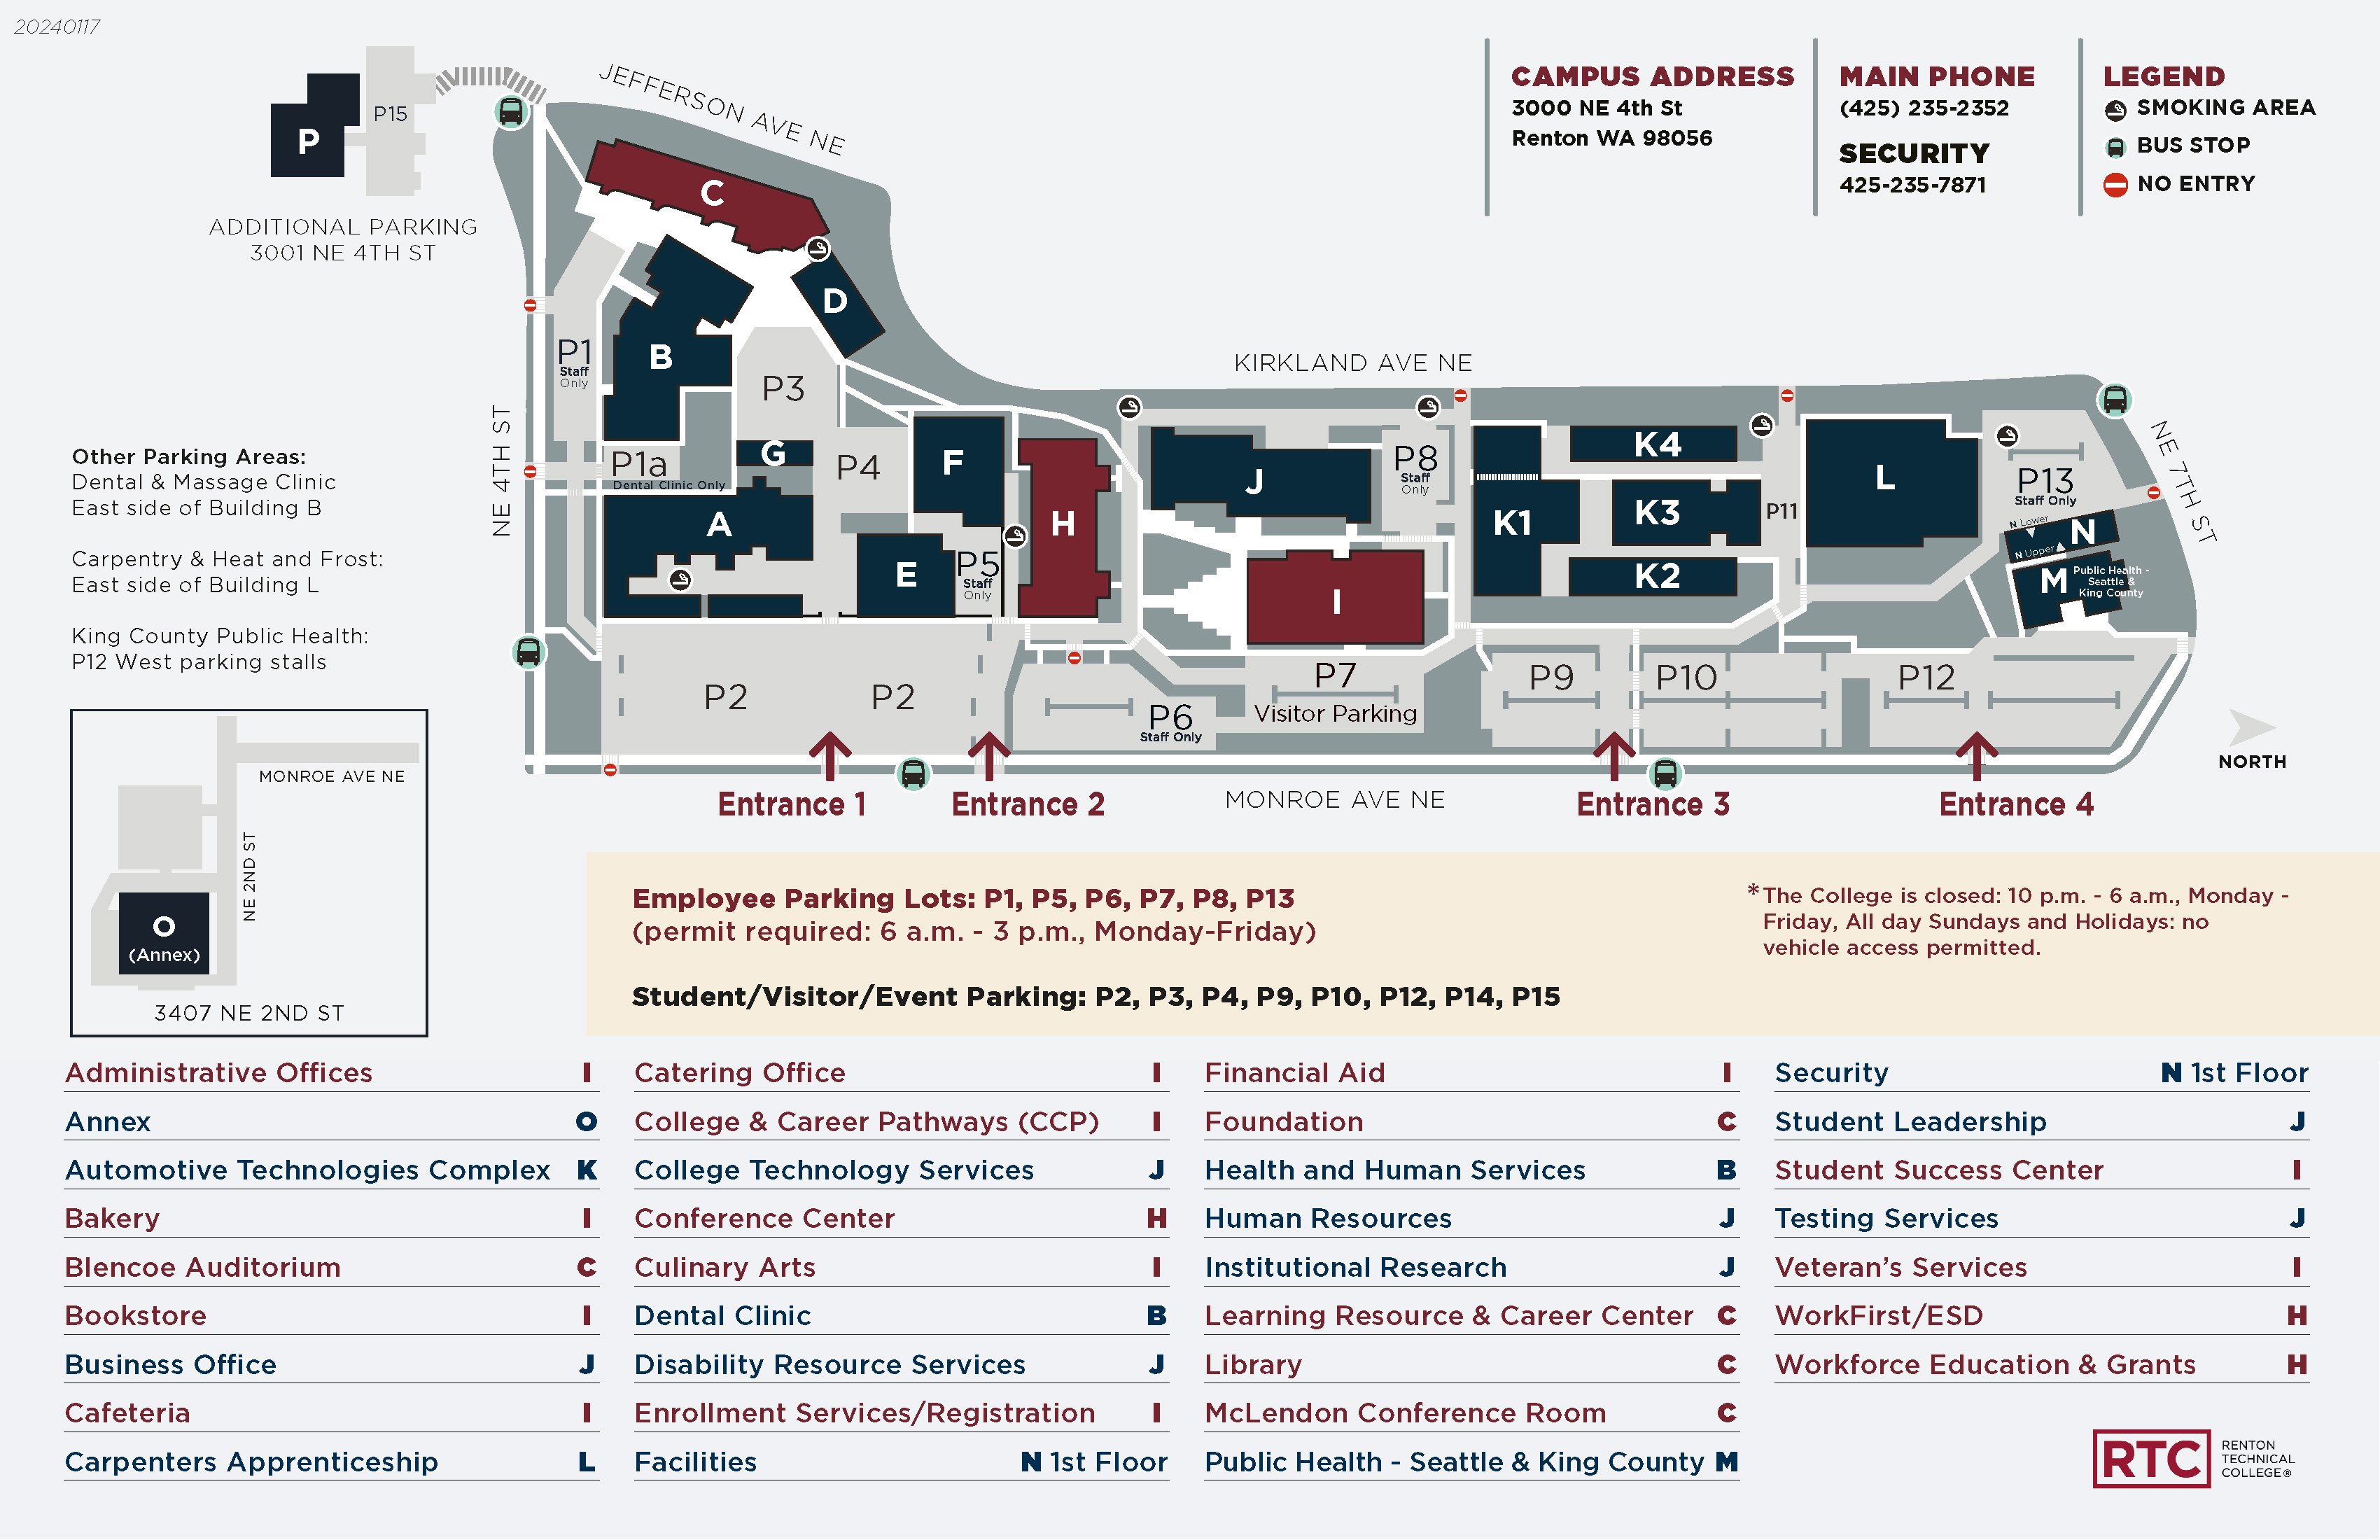 RTC campus map showing general parking locations with faculty/staff parking reserved in P1, P5, P6, P7, P8, P13, and portions of P12.